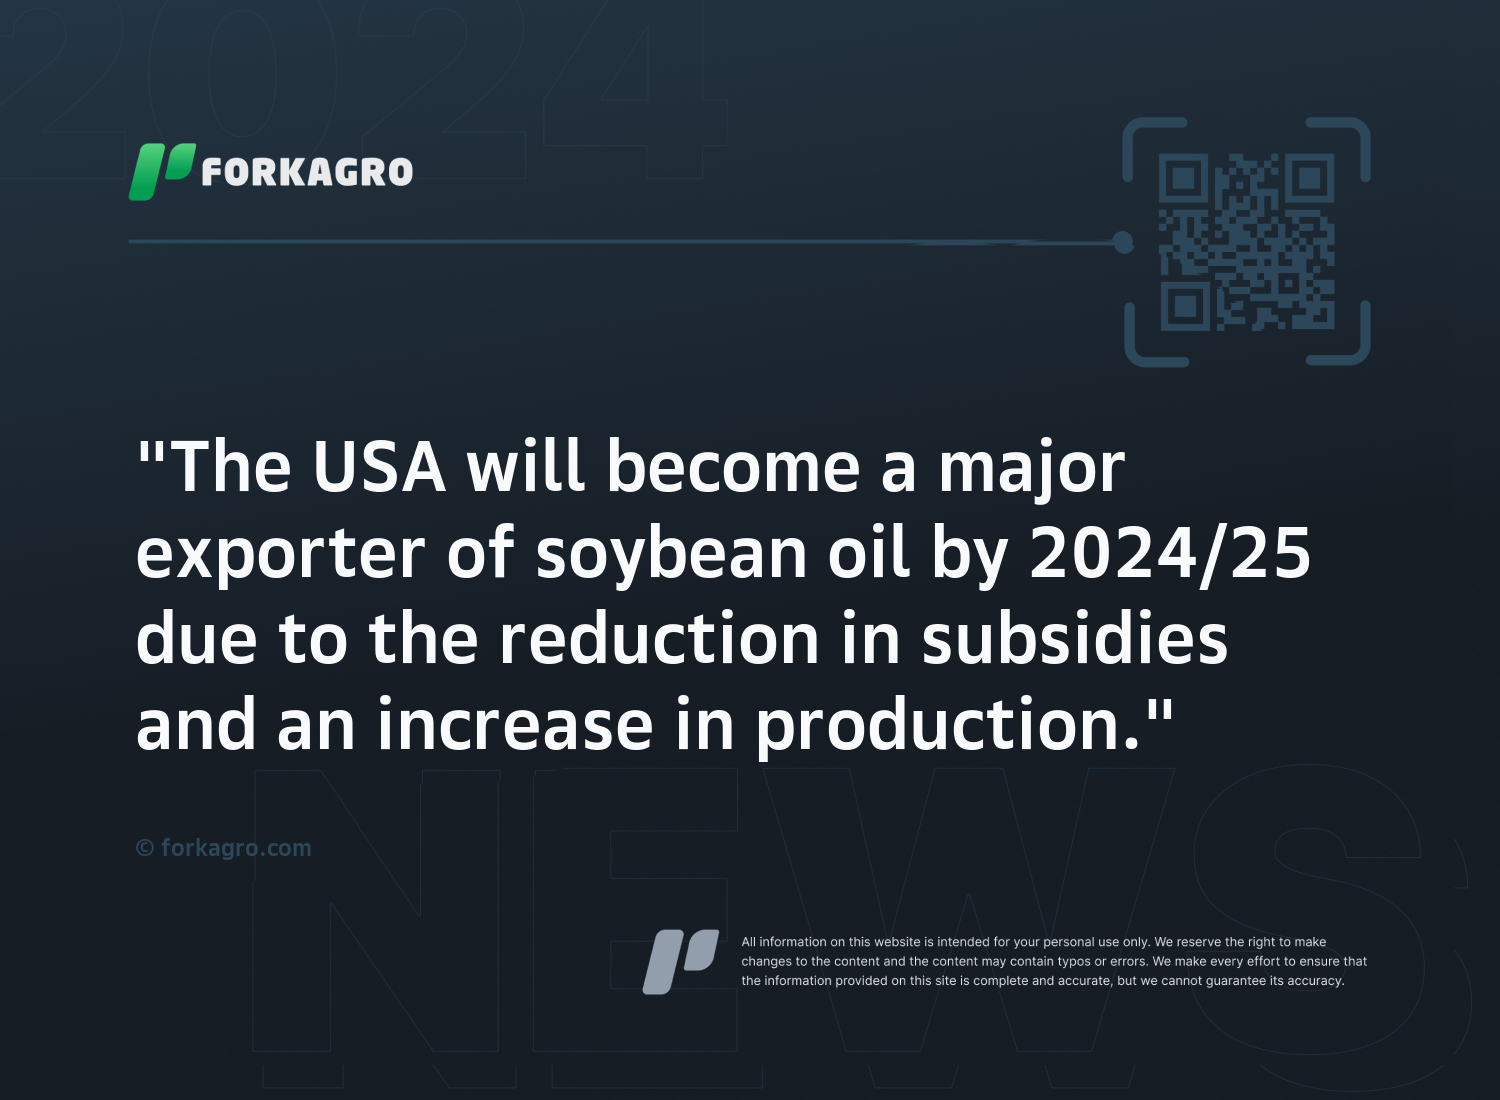 "The USA will become a major exporter of soybean oil by 2024/25 due to the reduction in subsidies and an increase in production."